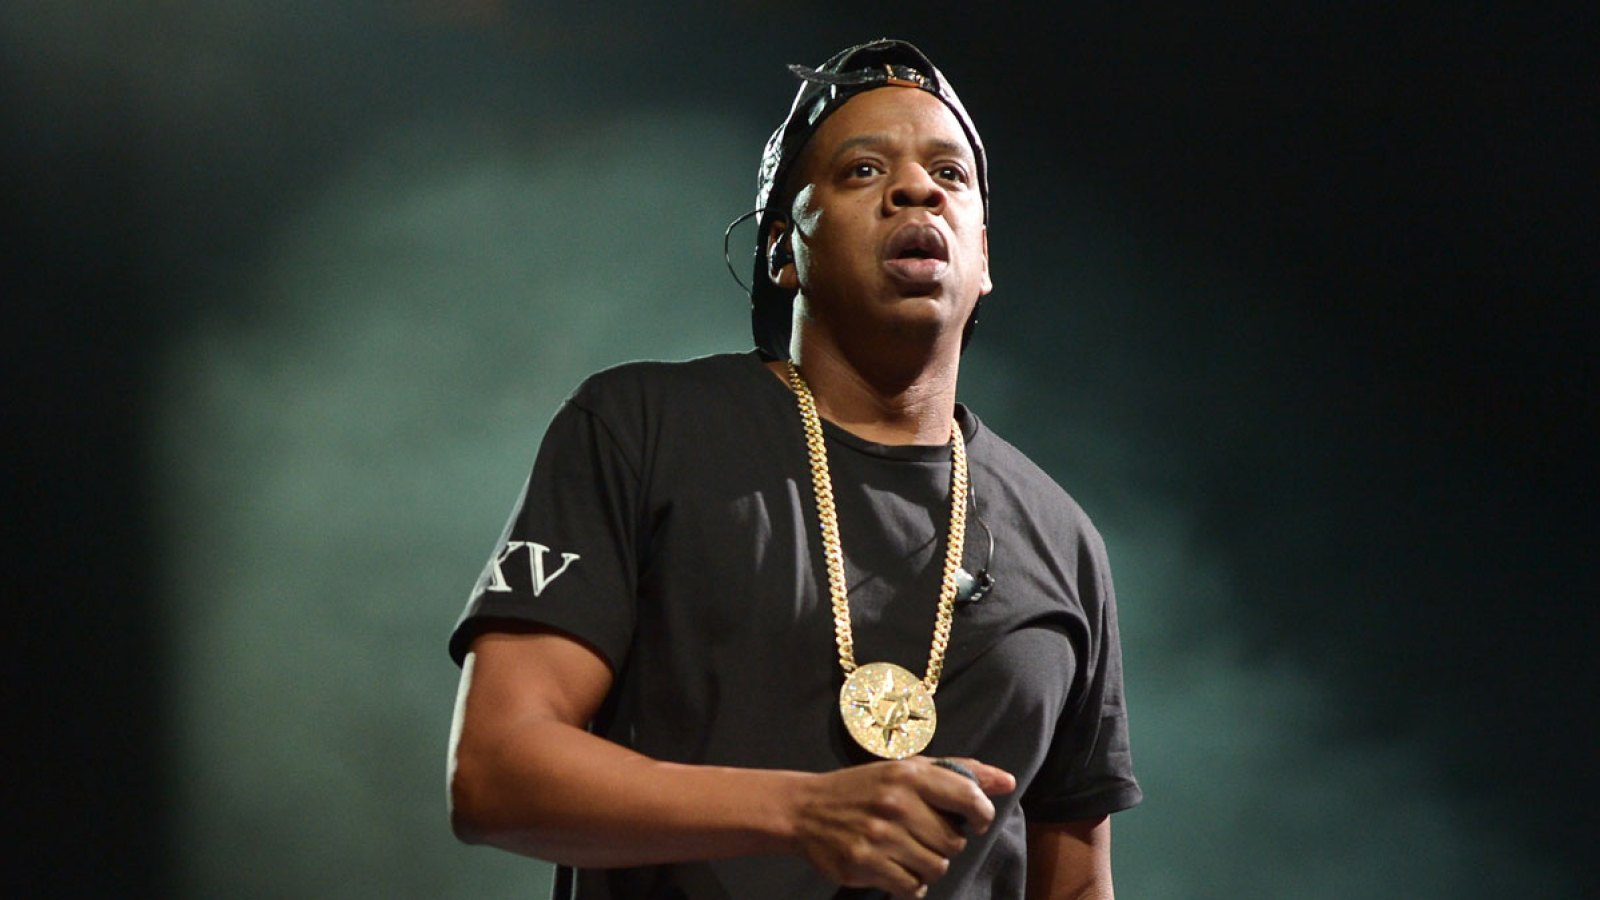 Jay Z has released a song about police brutality